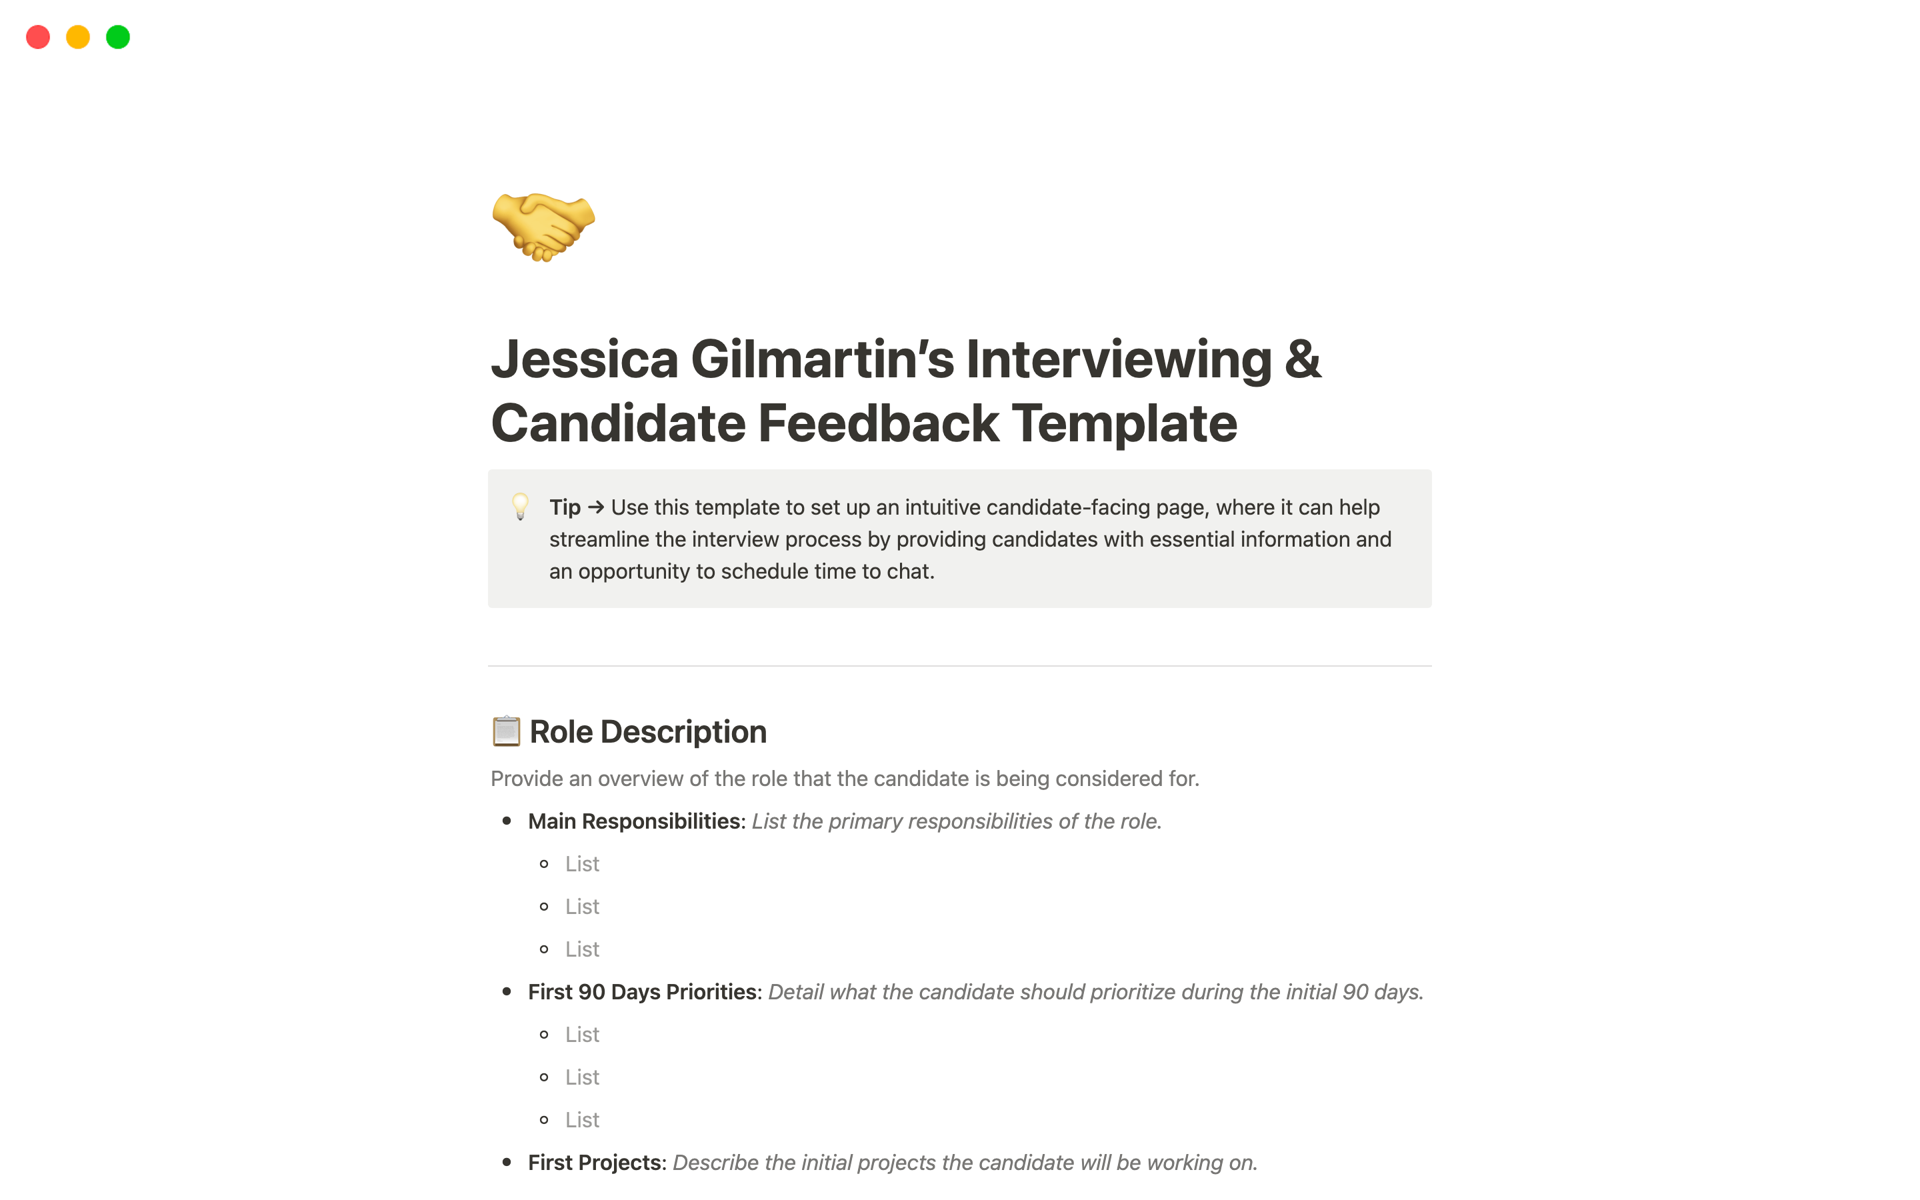 A template preview for Interviewing & Candidate Feedback